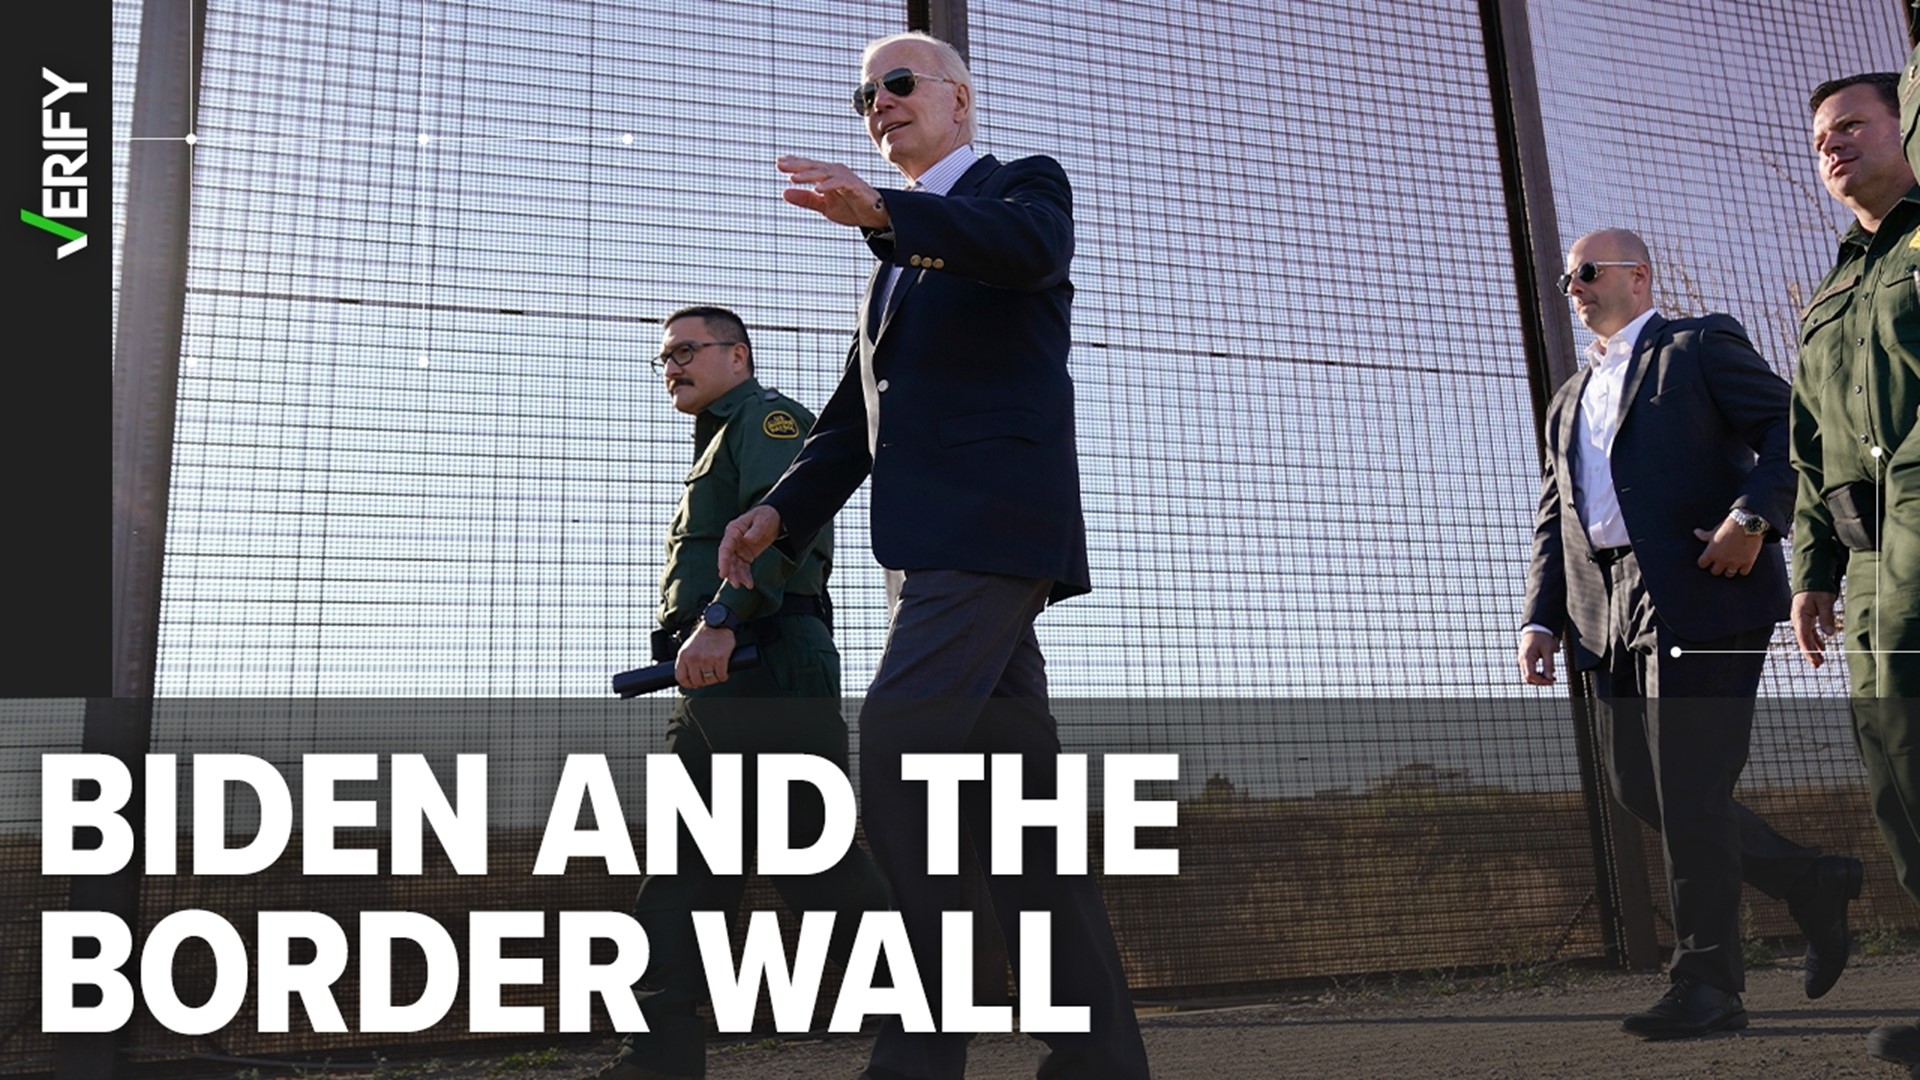 President Joe Biden waived 26 federal laws to allow 20 miles of border wall construction in south Texas. Biden has previously said he wouldn’t build the wall.